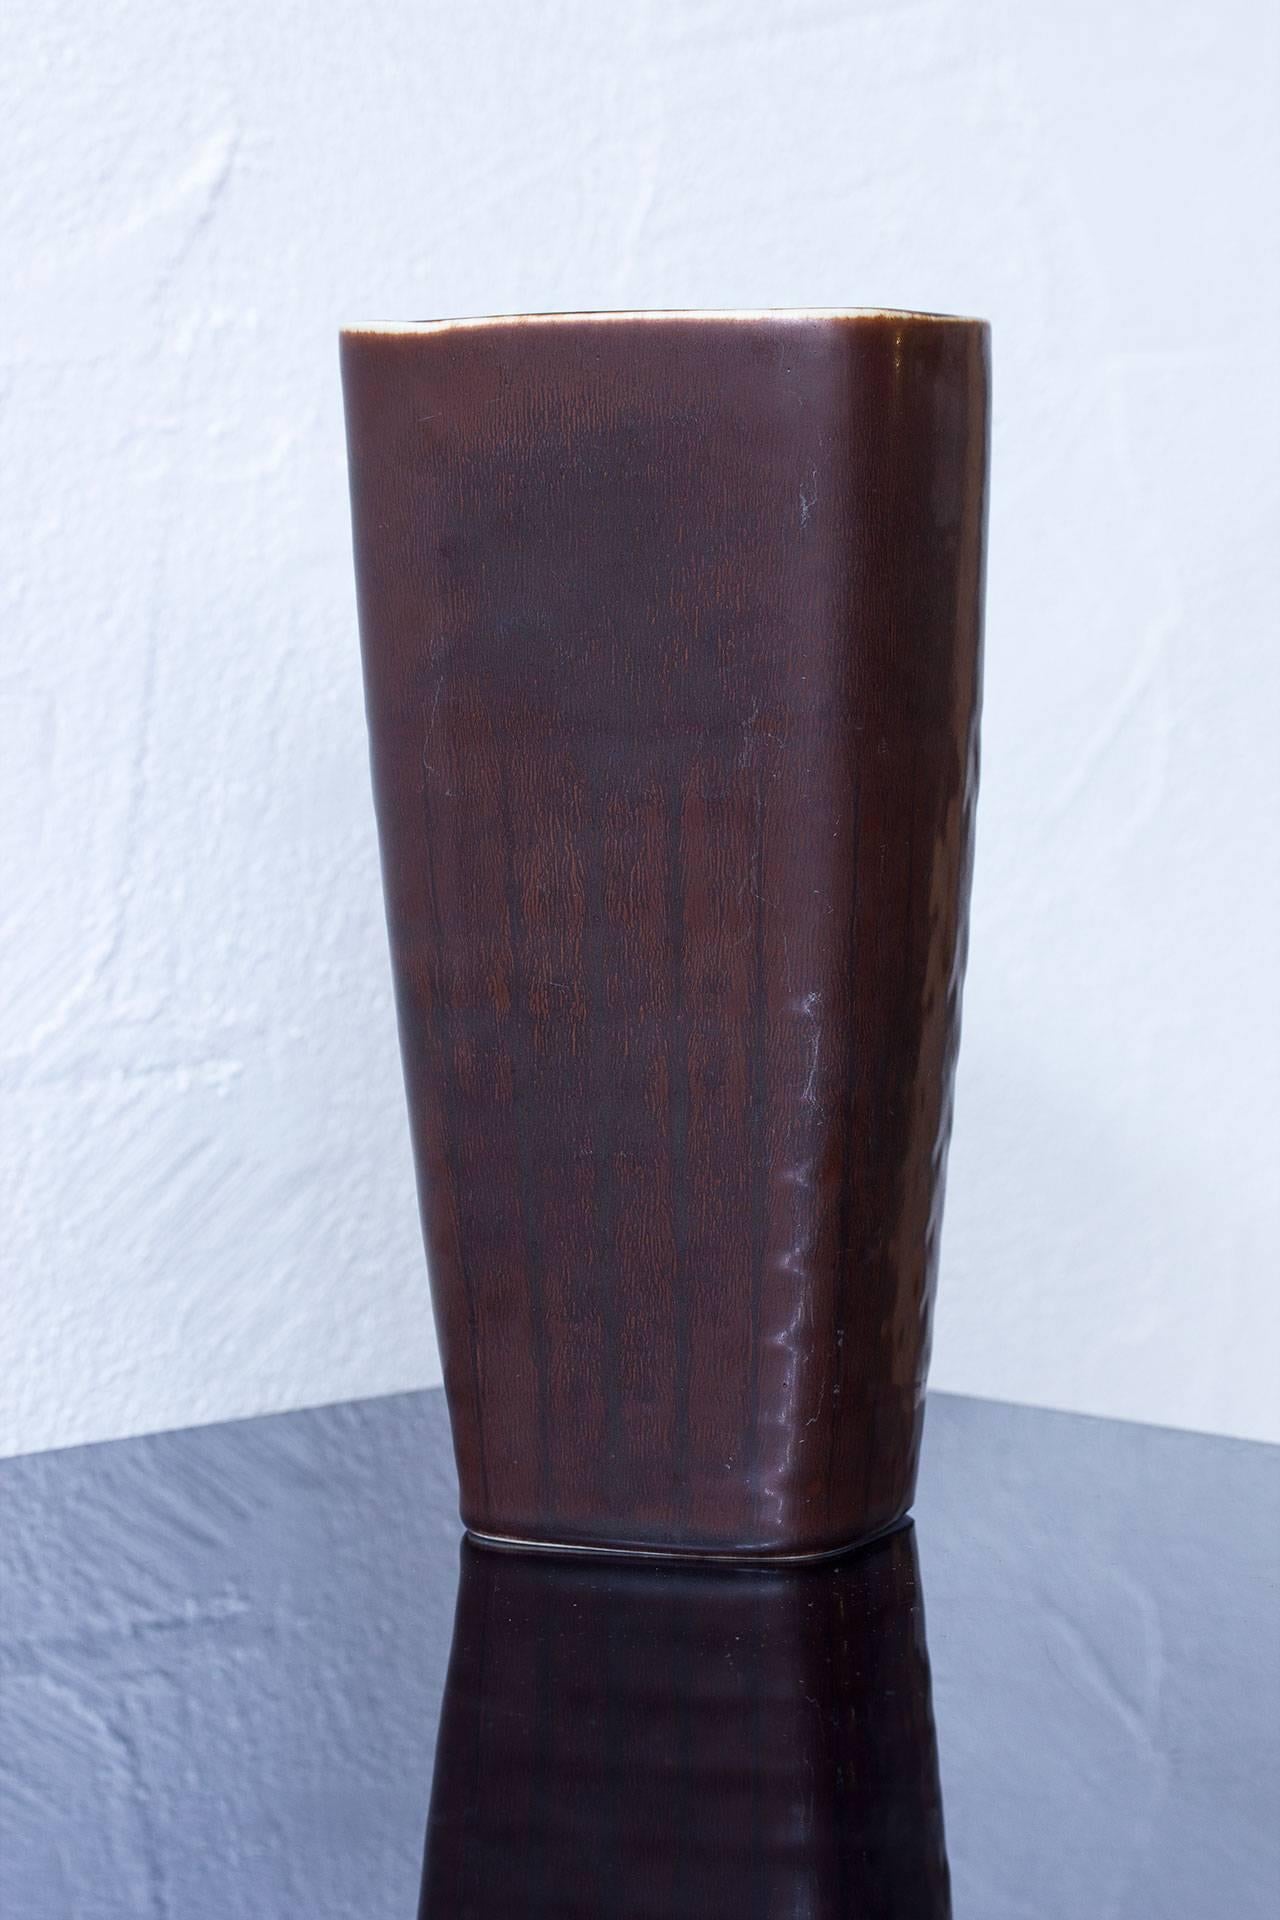 Large stoneware vase
designed by Carl-Harry
Stålhane for Rörstrand
in a brown hare’s fur
glaze. Hand thrown in
Sweden, in the 1950s.
Hand signed “R”, three
crowns of Rörstrand
with initials of ceramist.